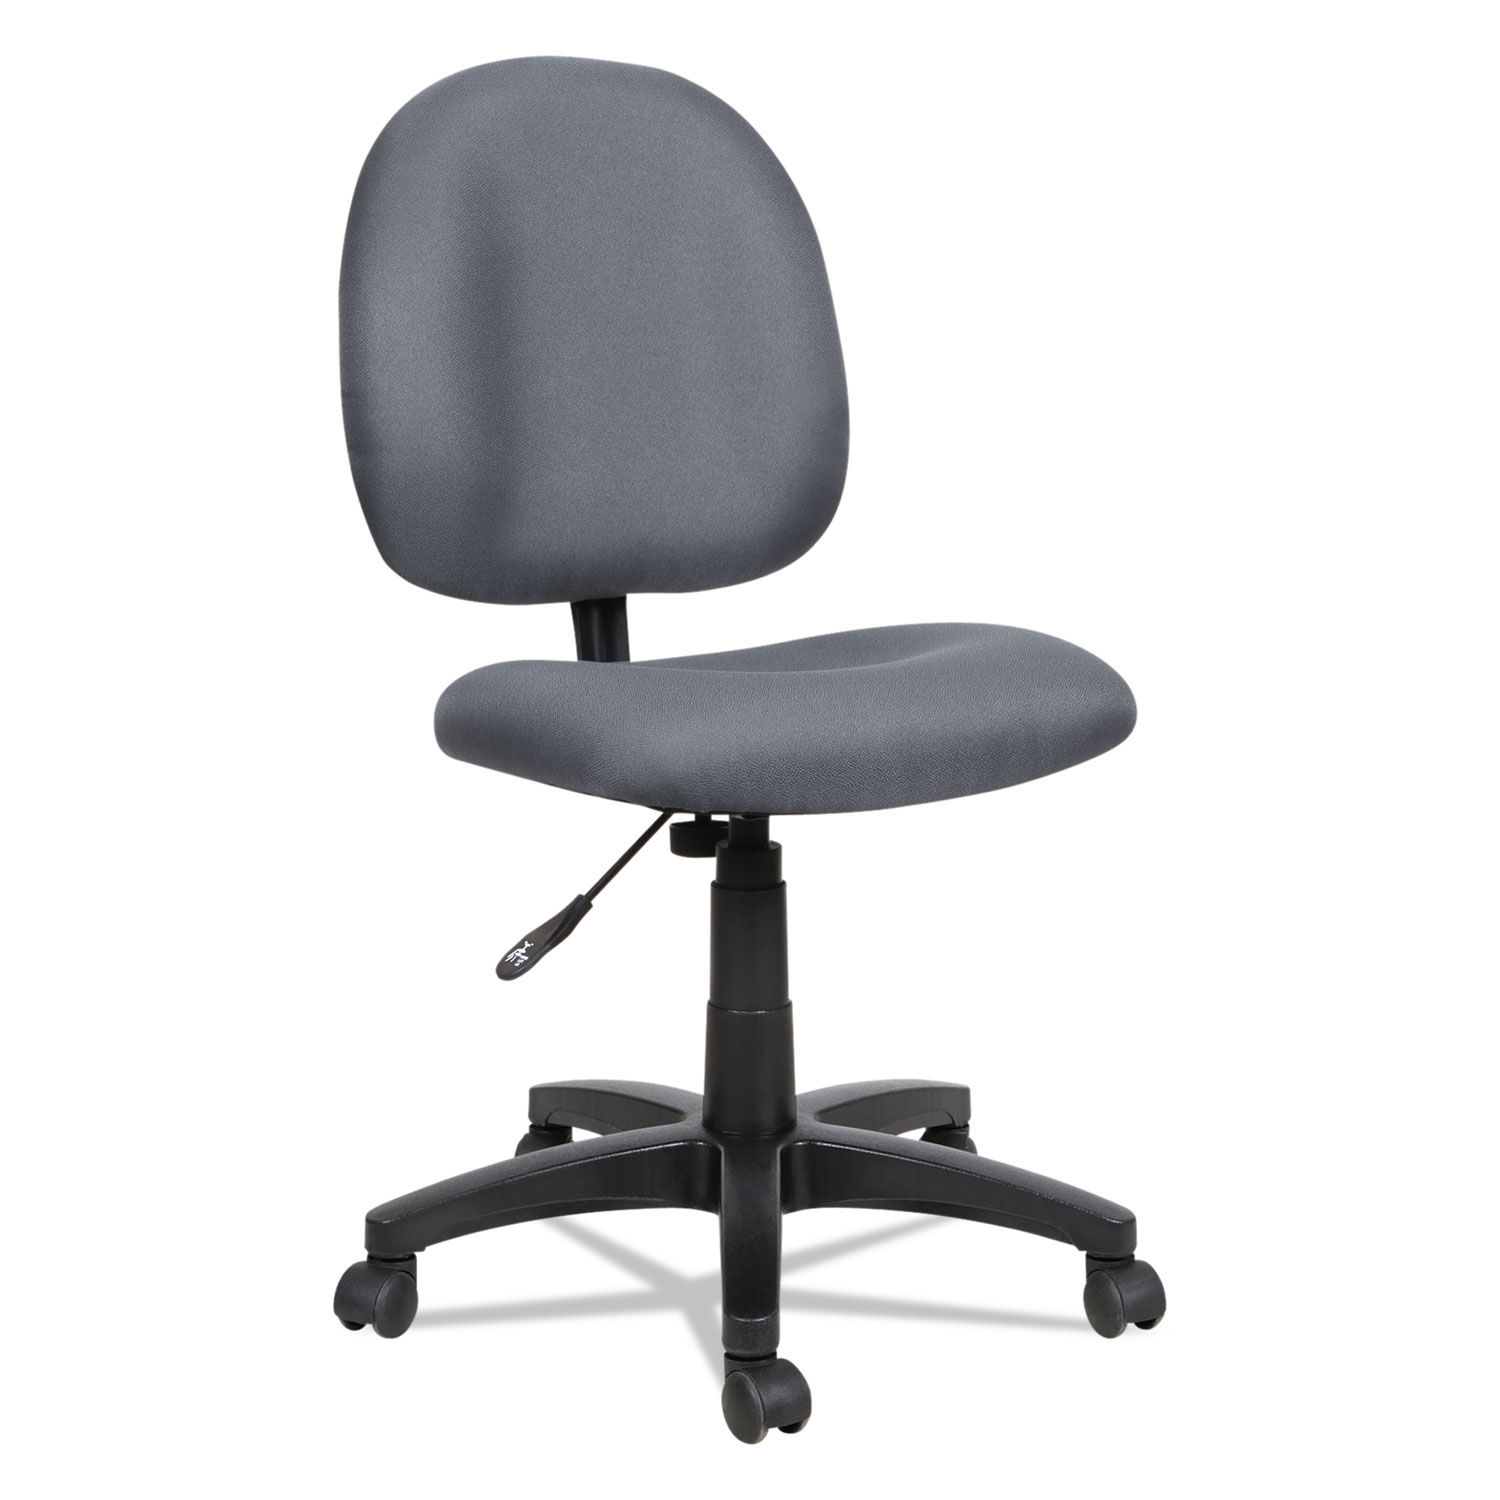 Alera Essentia Series Swivel Task Chair Supports Up to 275 lb, 17.71" to 22.44" Seat Height, Gray Seat/Back, Black Base